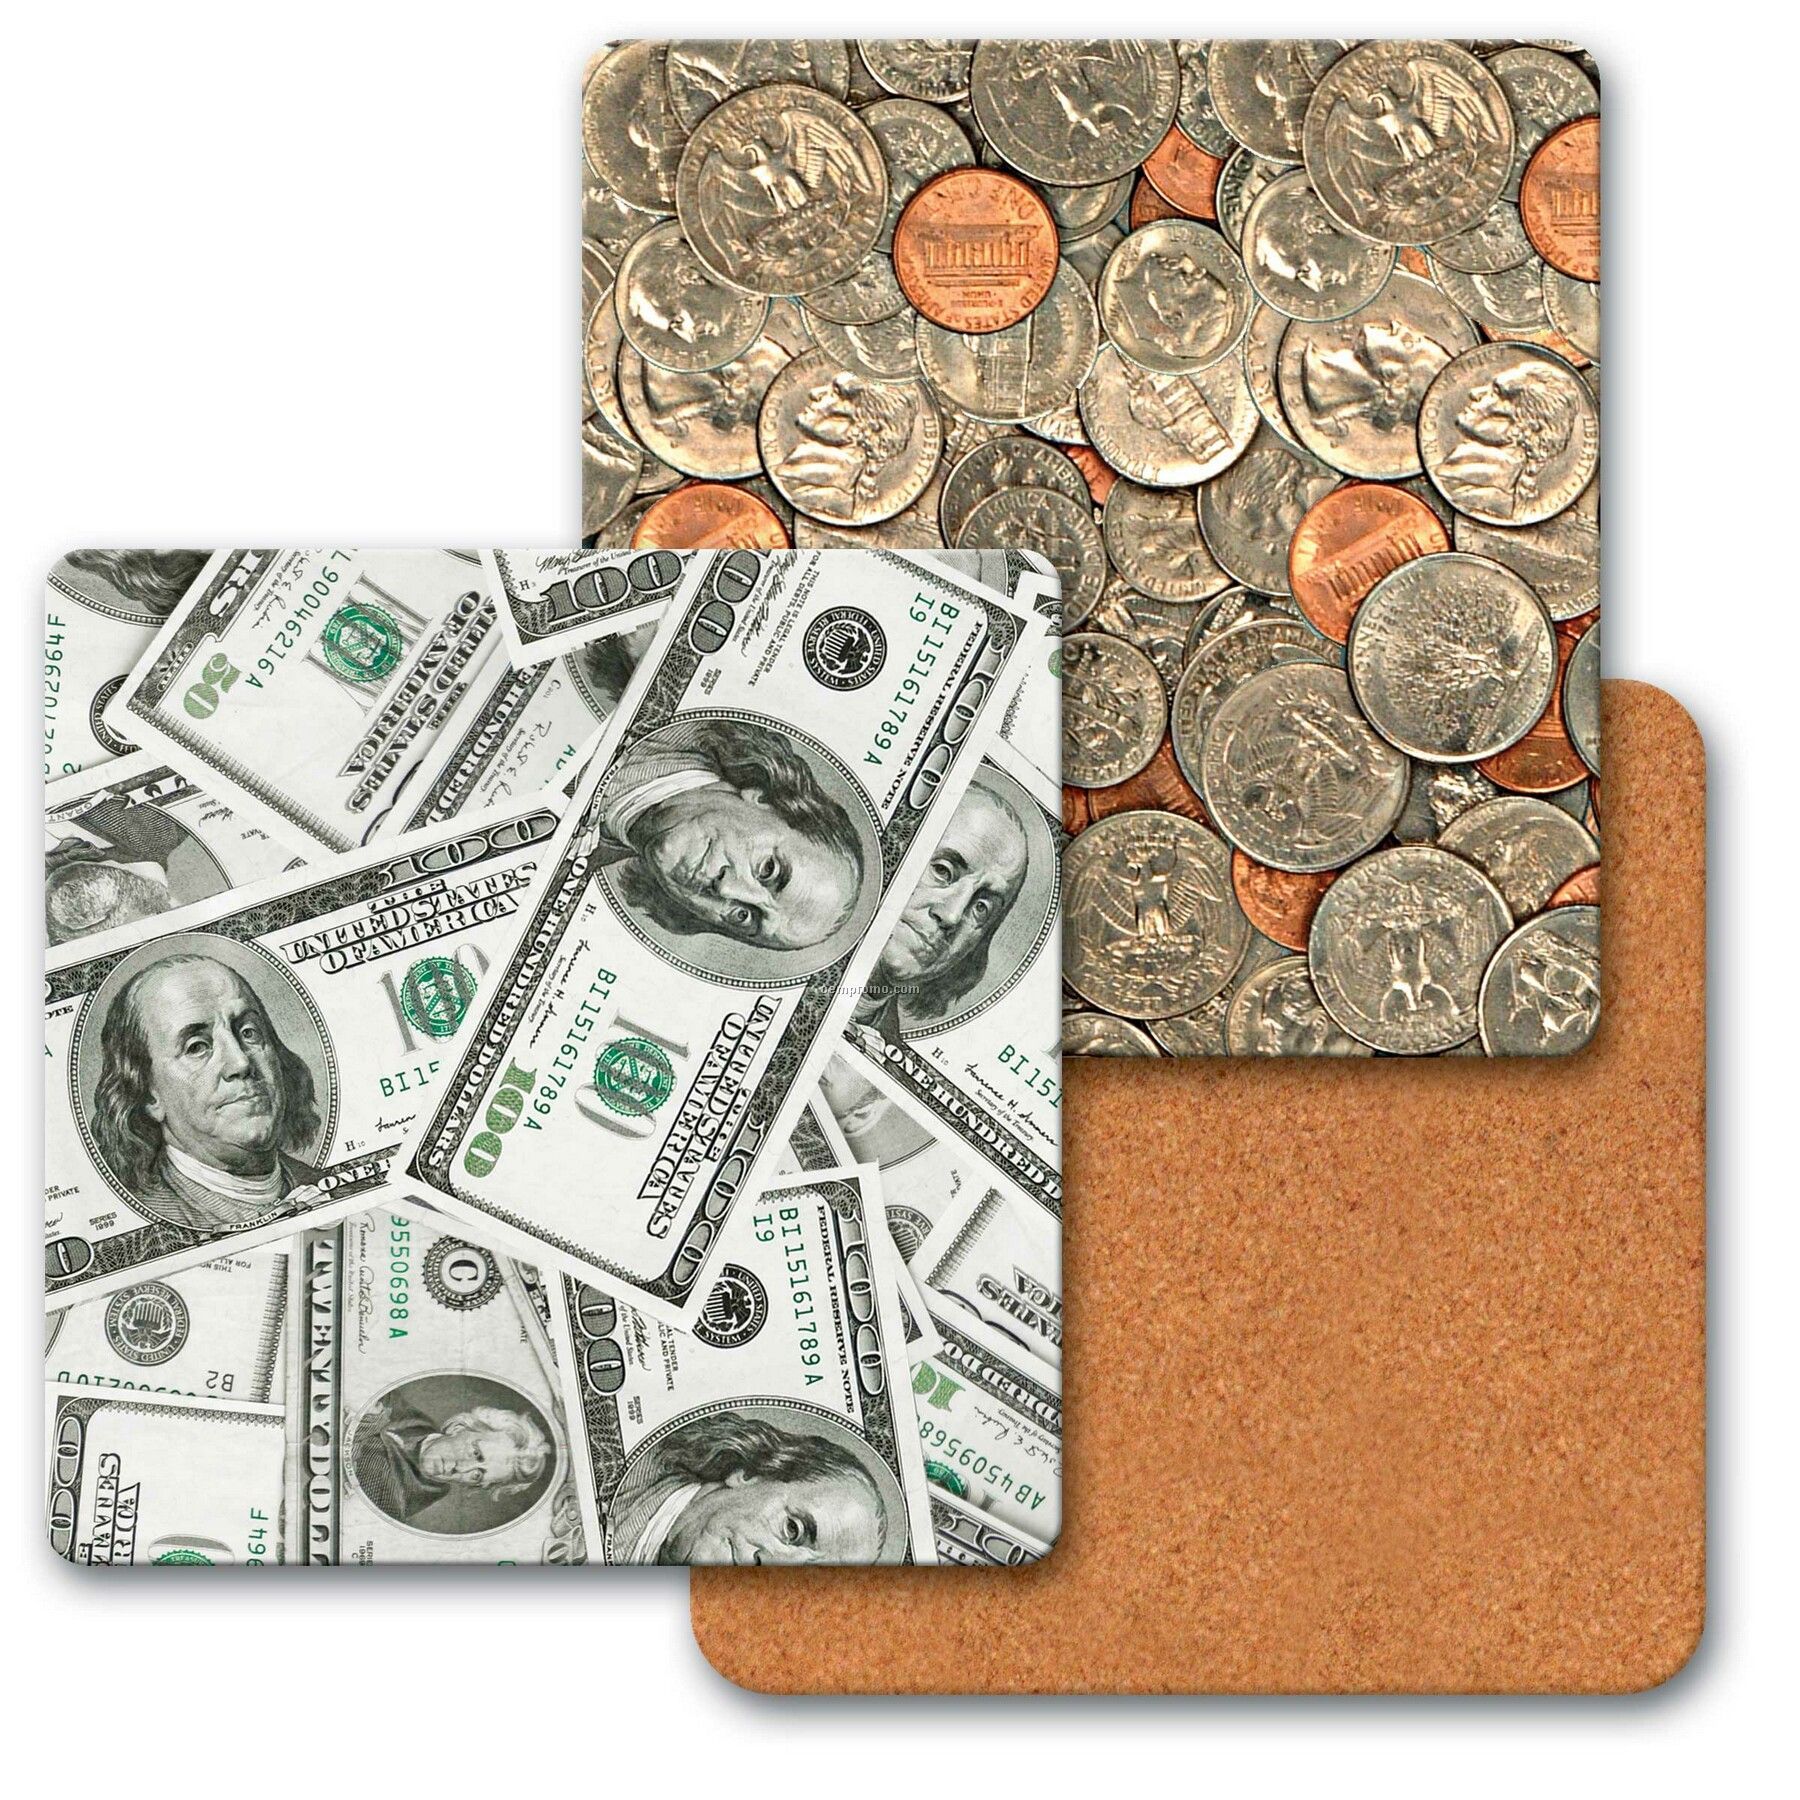 4" Square Coaster W/3d Lenticular Images Of Dollars And Cents ( Blanks)